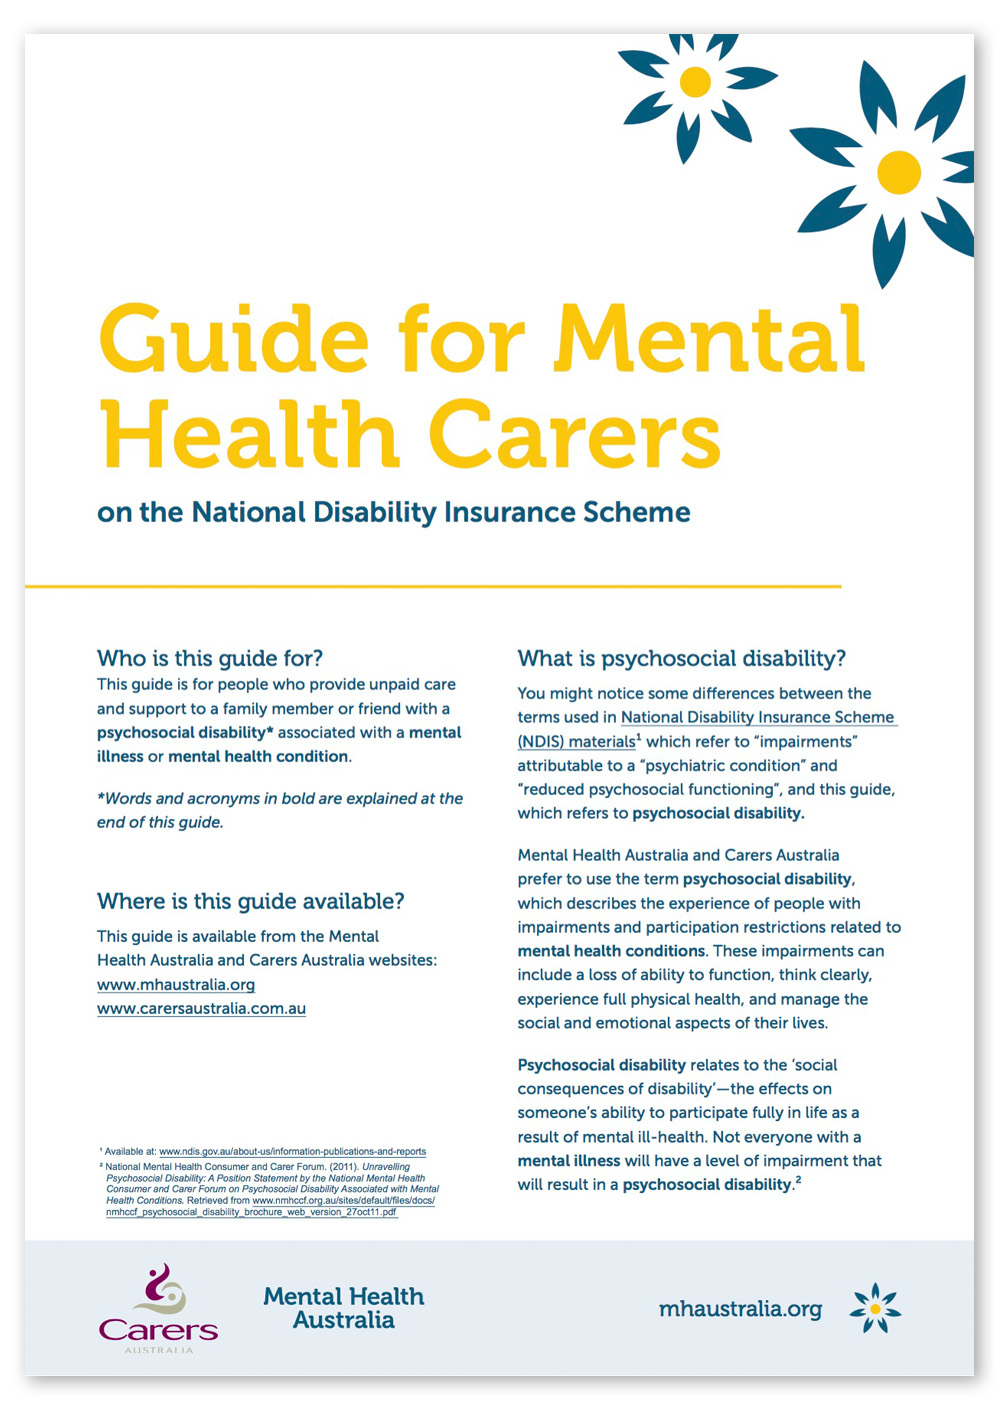 Screenshot of page 1 of the Mental Health Carers Guide PDF